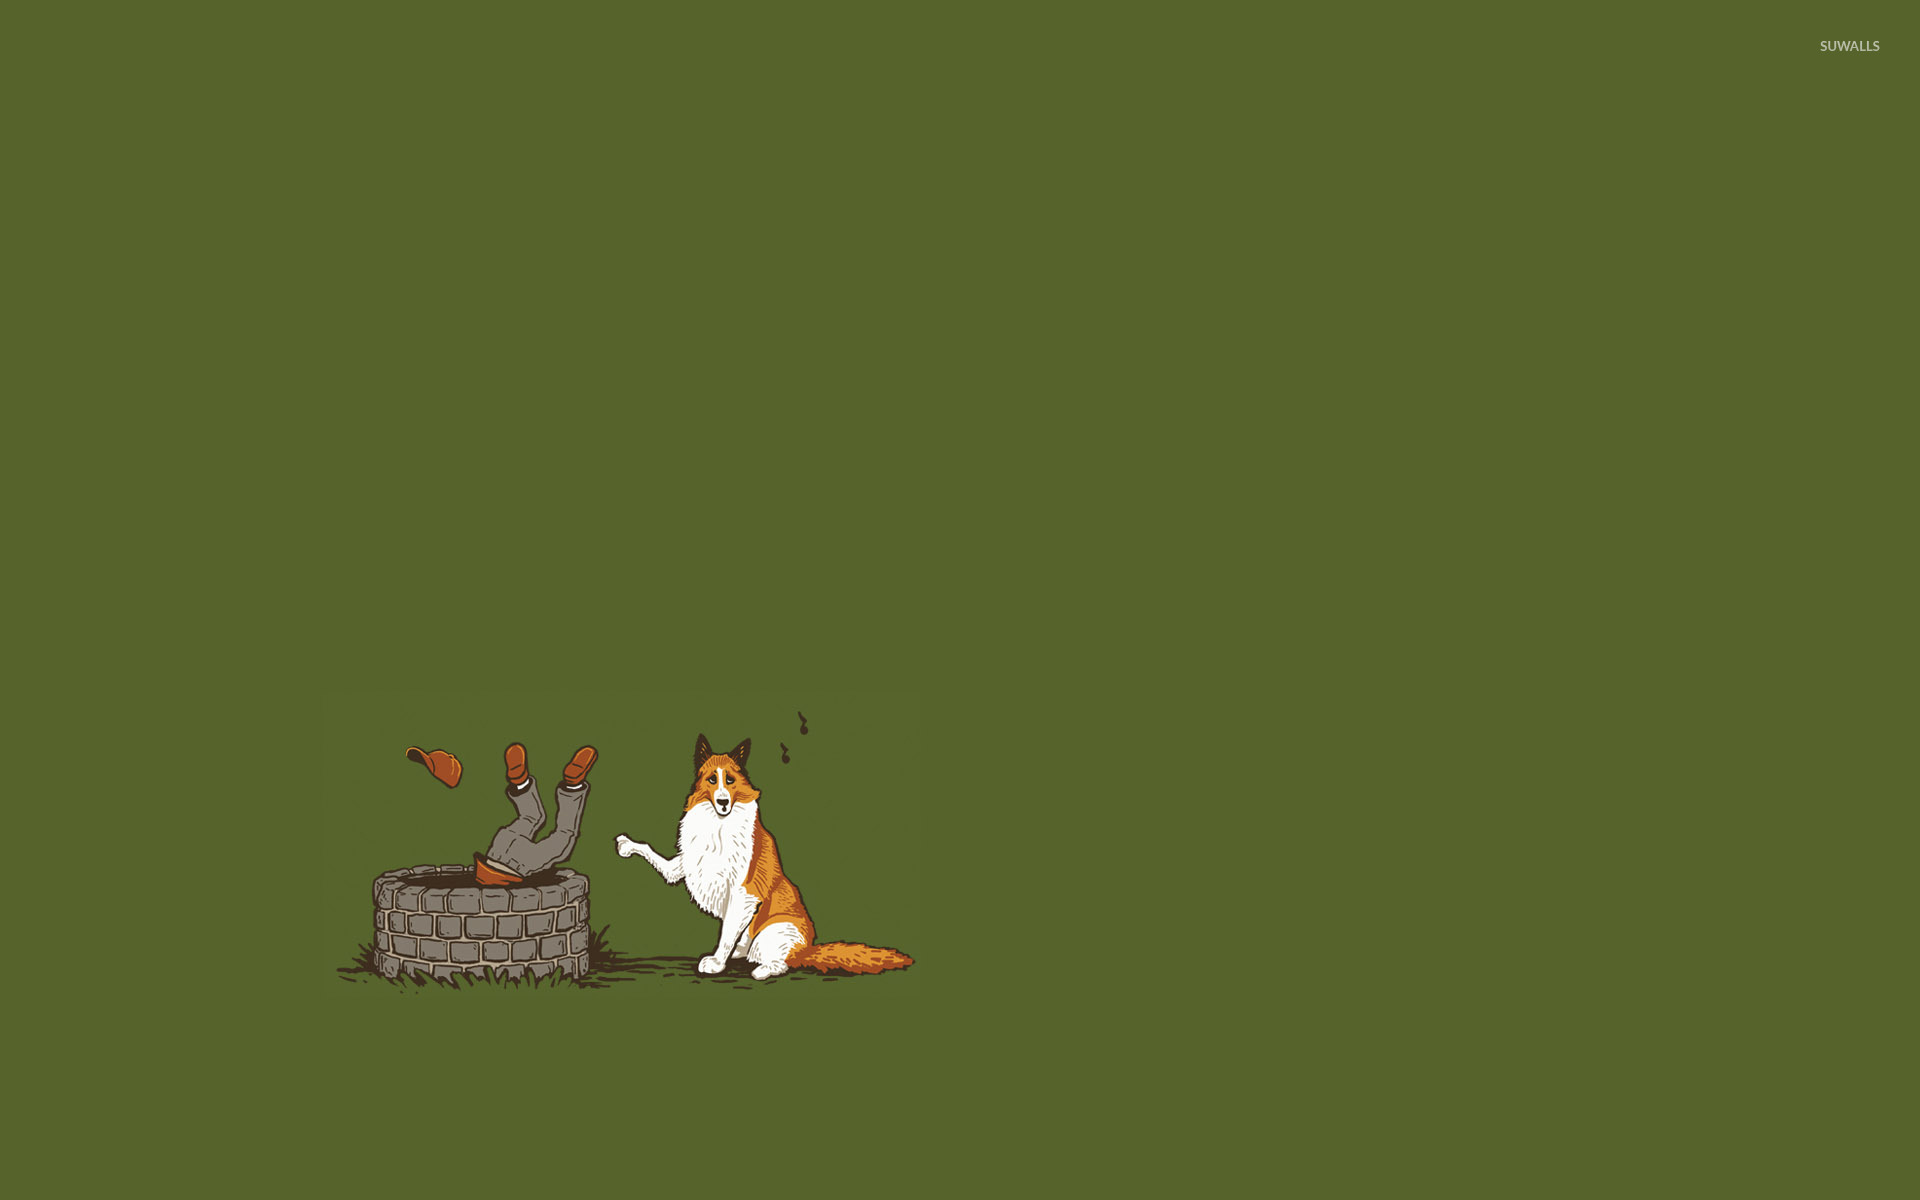 Fox pushed the hunter in the well wallpaper - Funny wallpapers - #27709